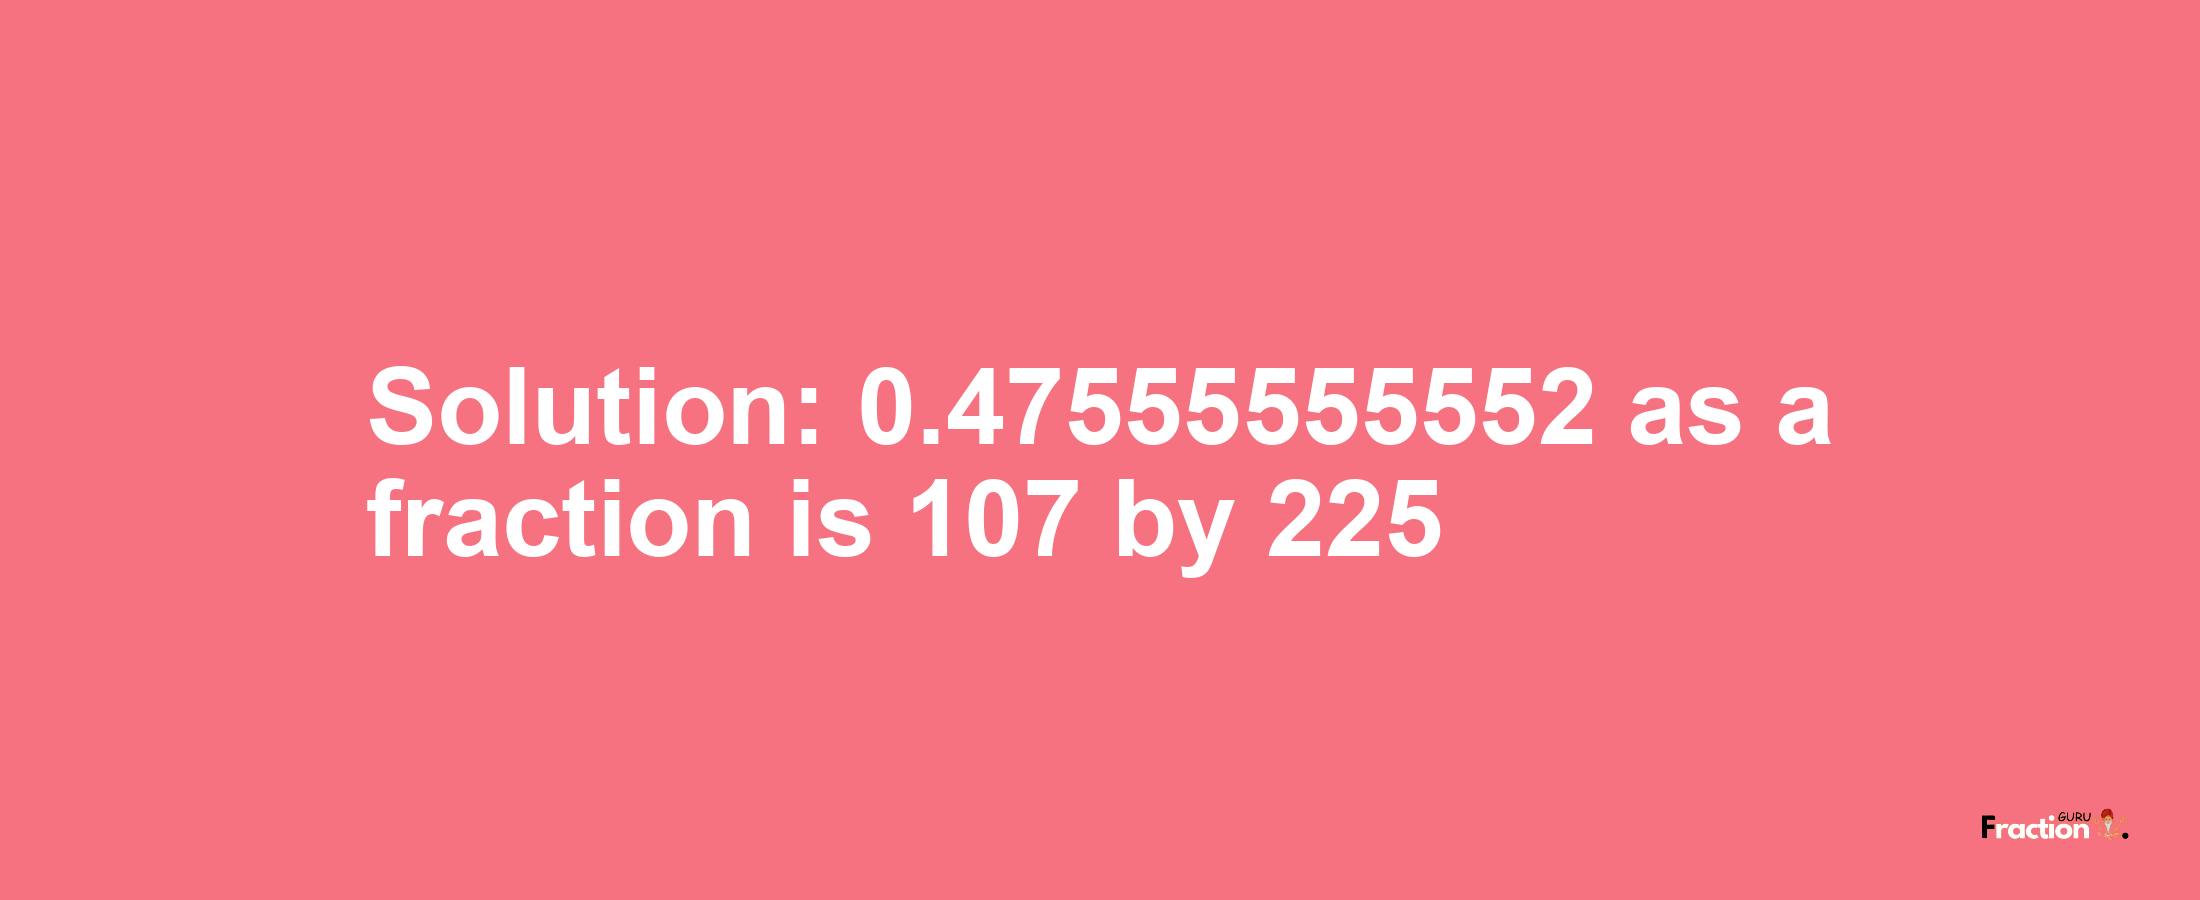 Solution:0.47555555552 as a fraction is 107/225